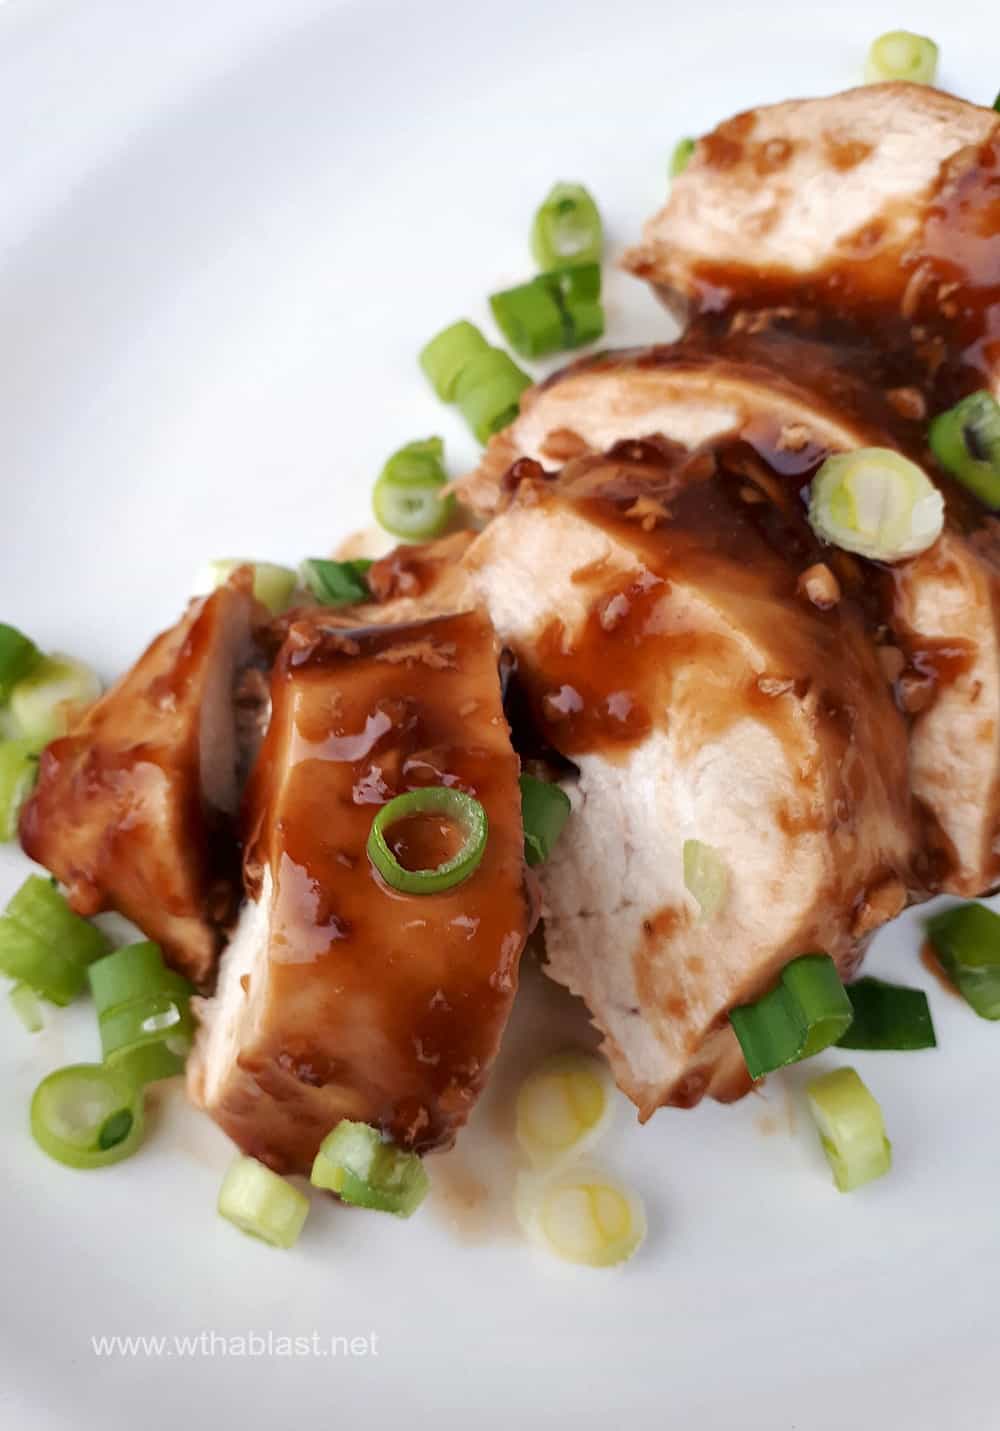 Tender,  juicy Instant Pot Teriyaki Chicken takes only a few minutes to make and is so tasty and flavorful - a definite winner during week nights for dinner